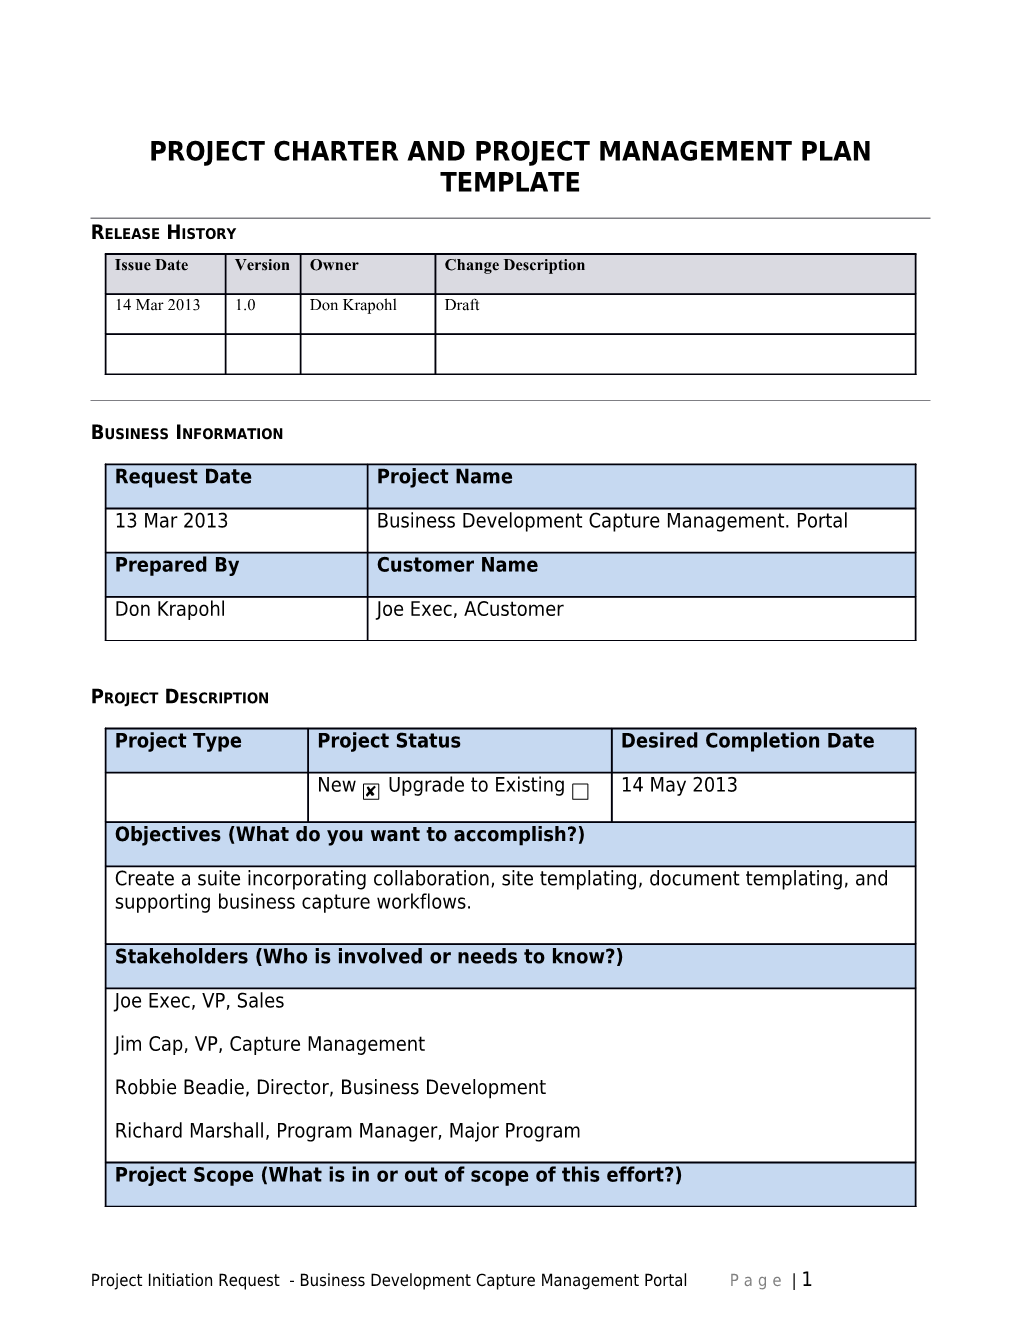 Project Charter and Project Management Plan Template